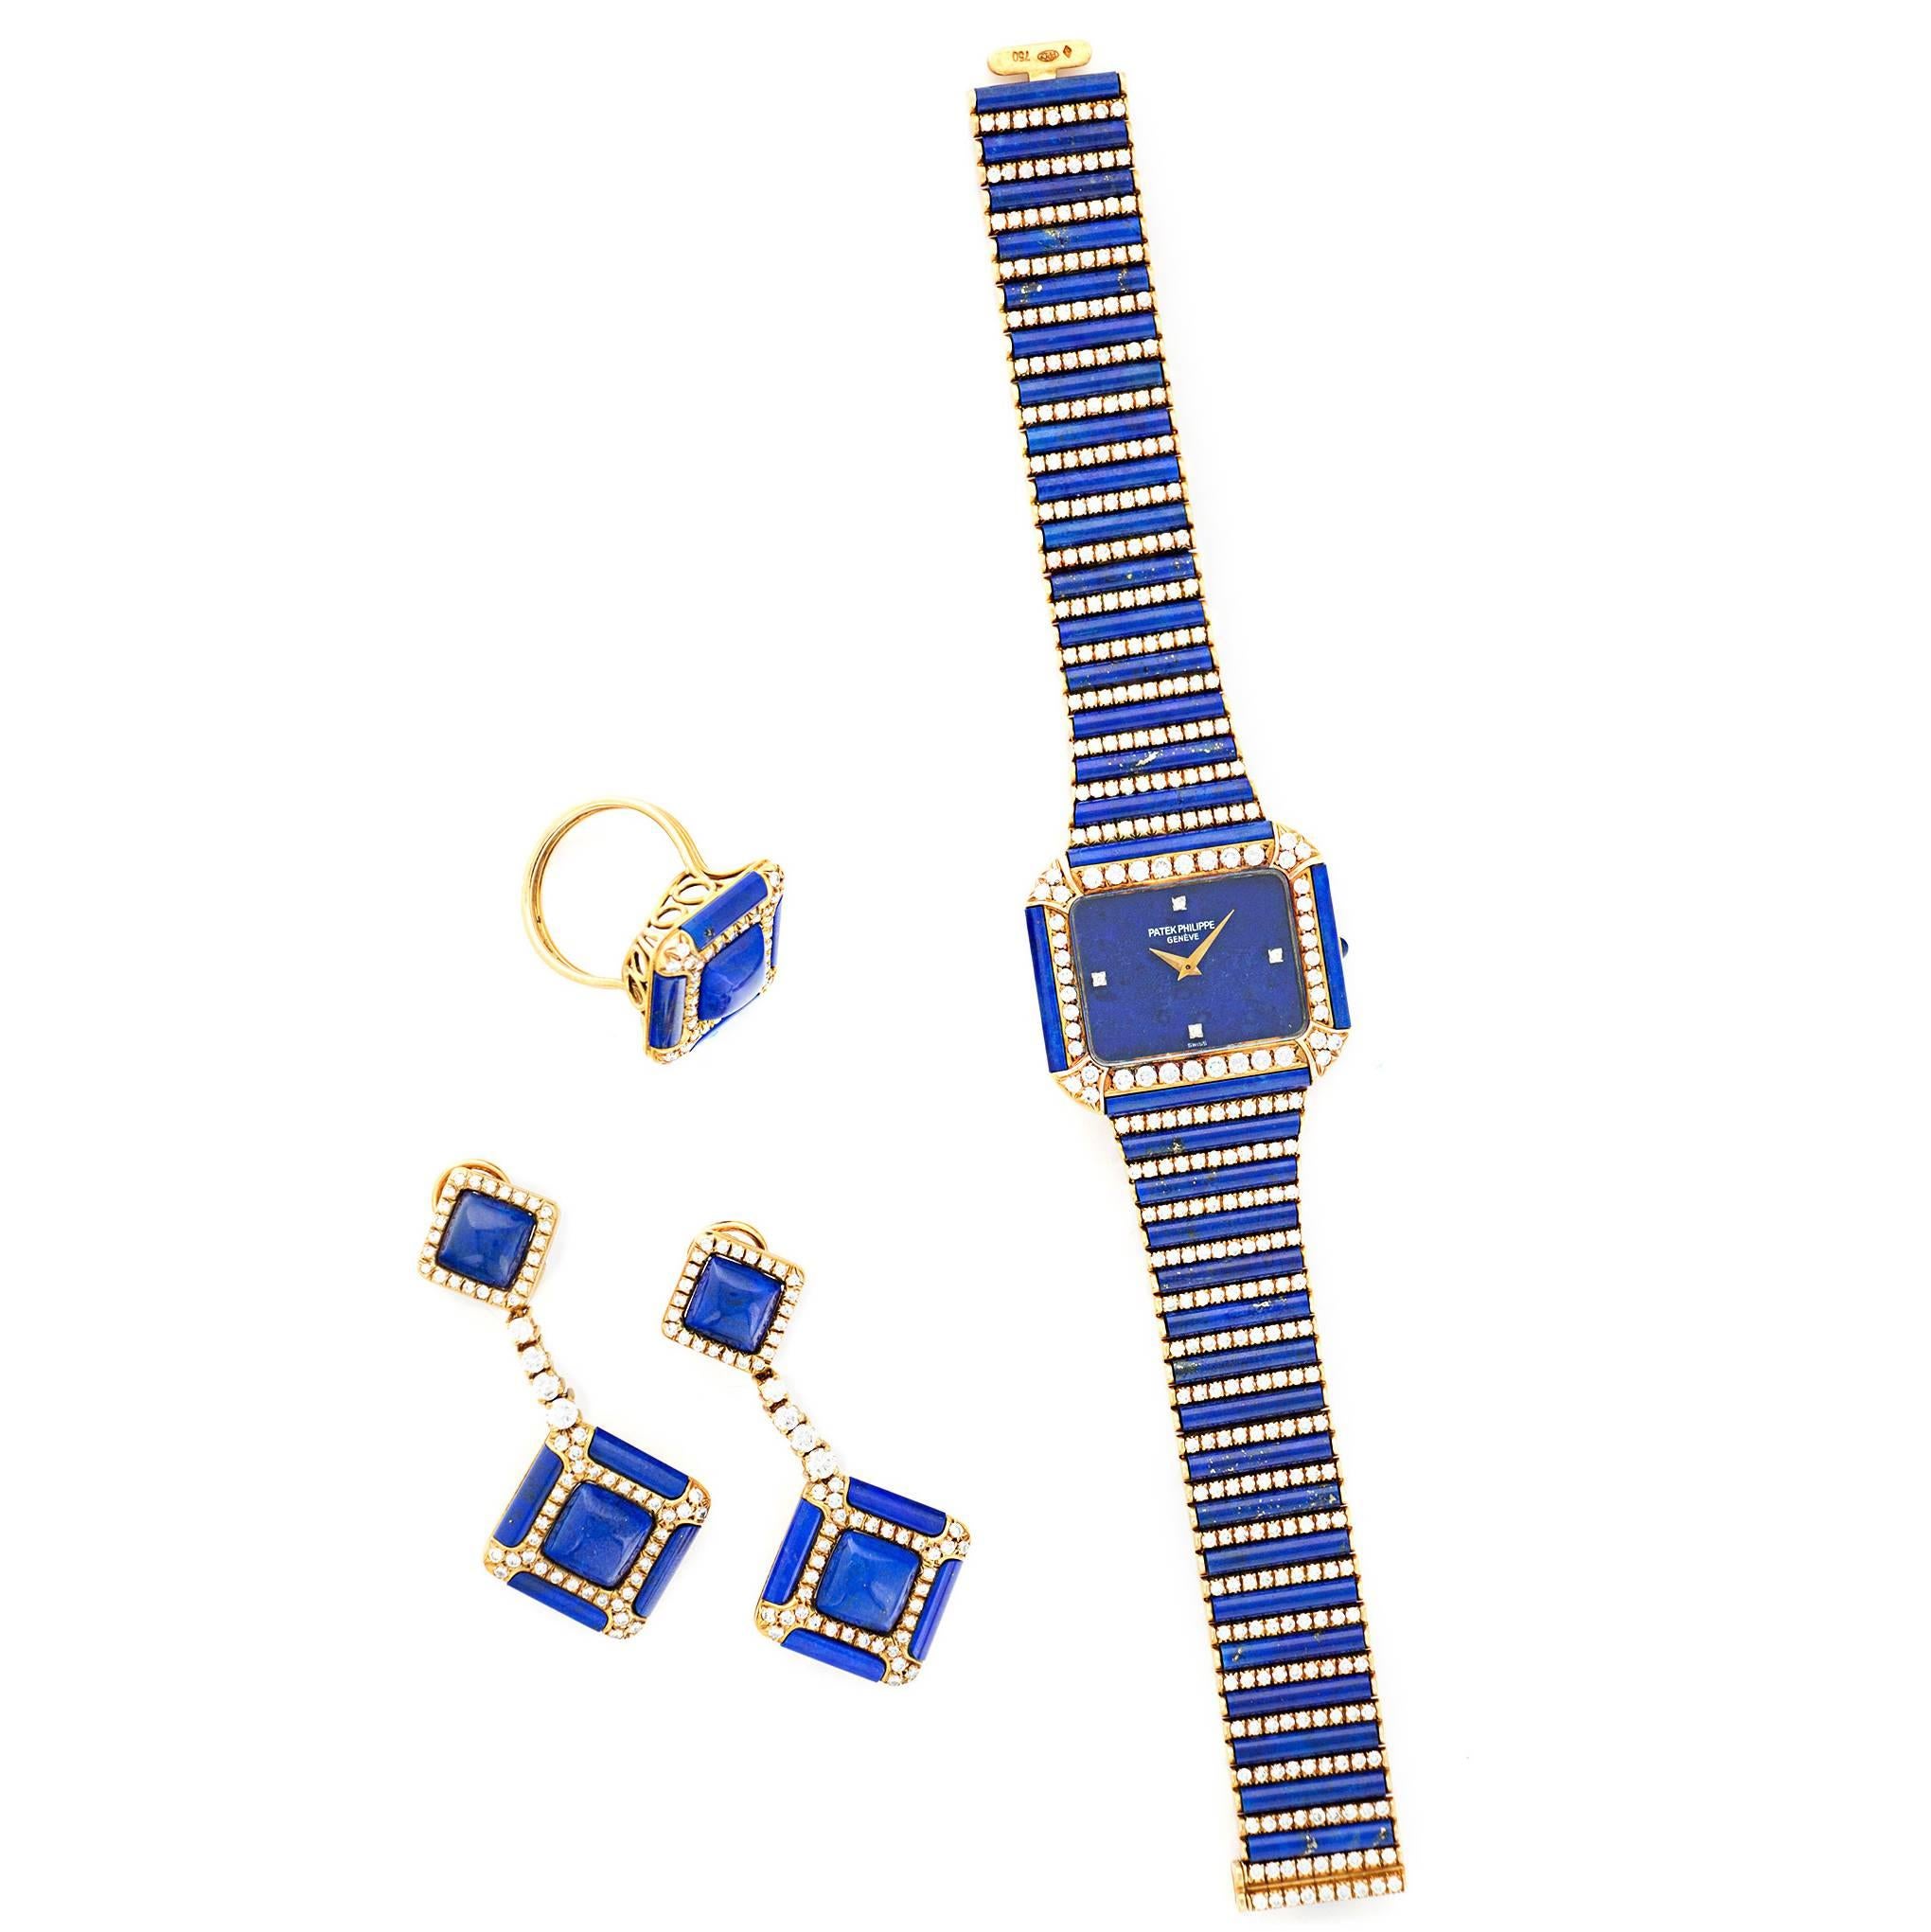 Patek Philippe Yellow Gold Lapis and Diamond Watch, Earrings, and Ring Set